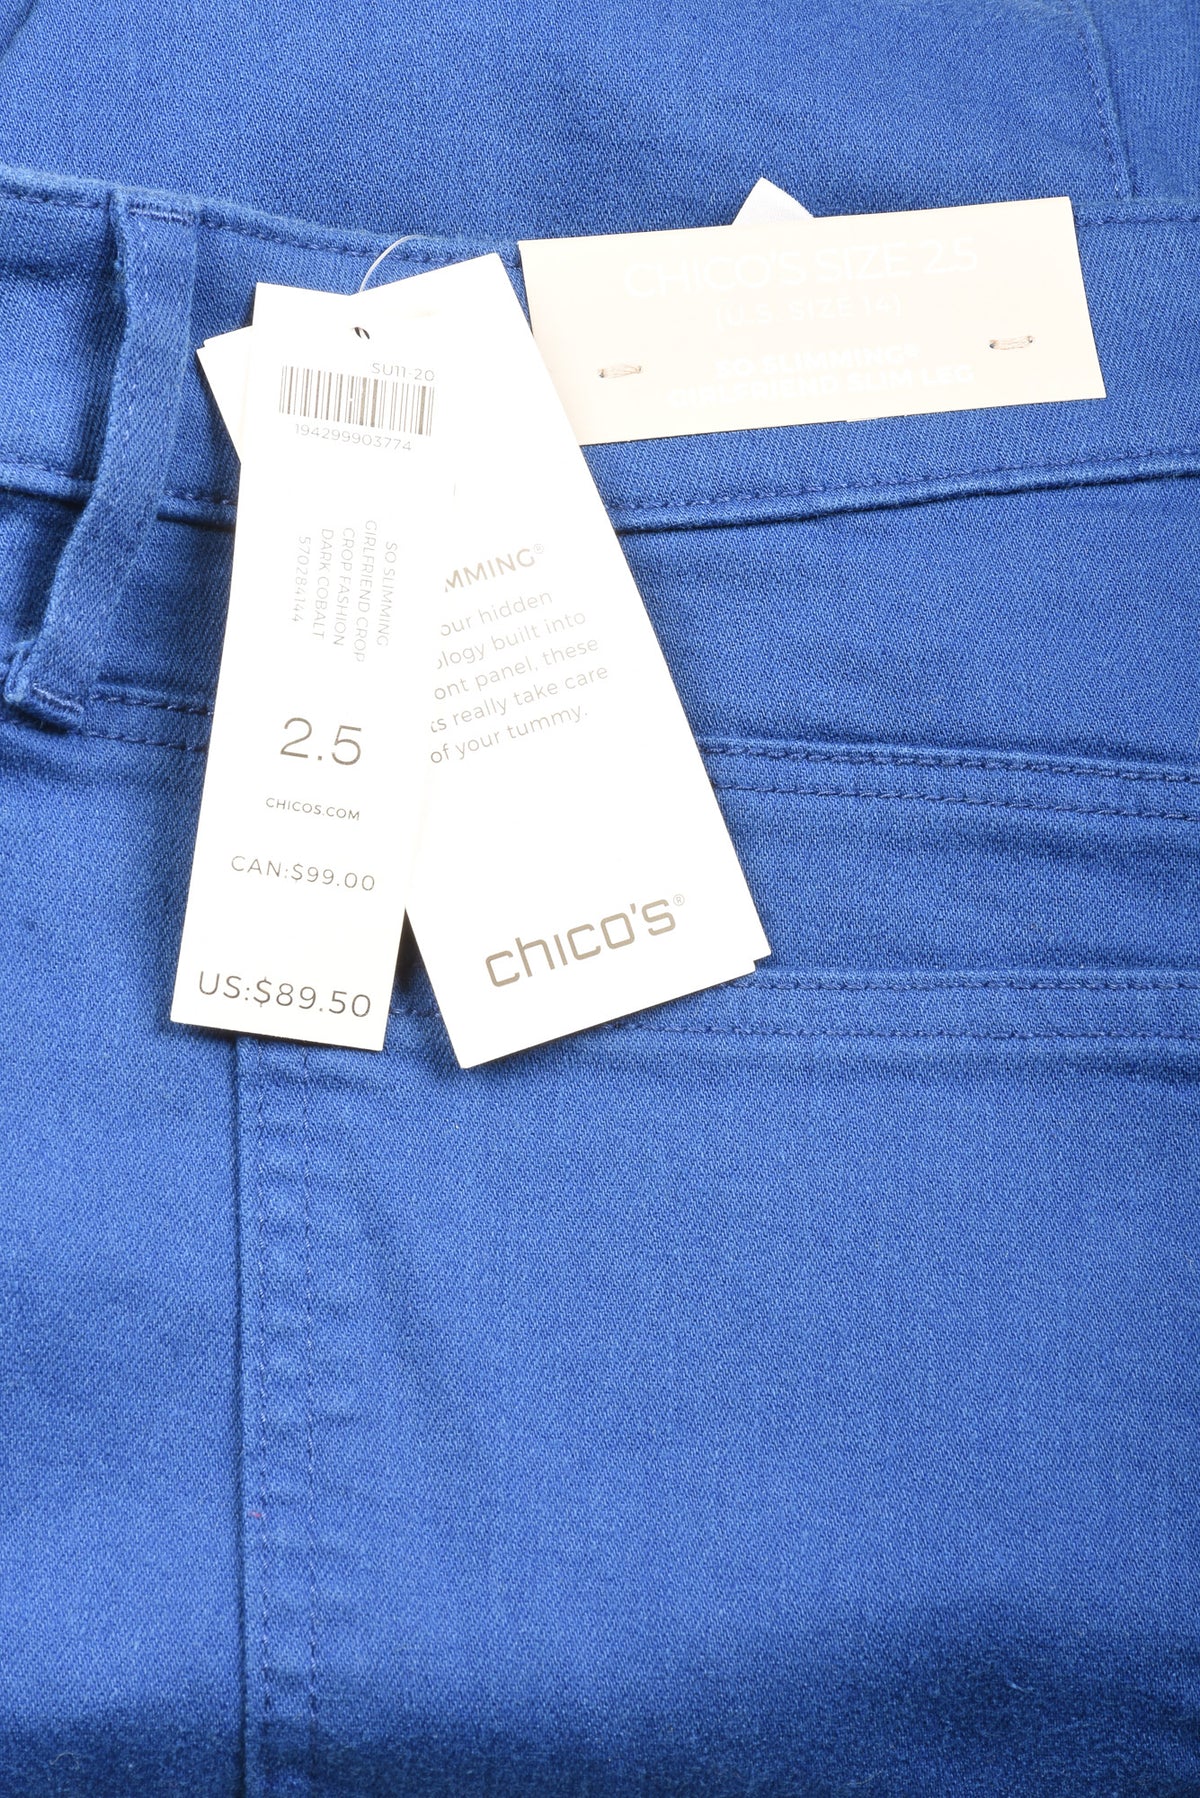 Chico&#39;s Size 2.5 Women&#39;s Jeans